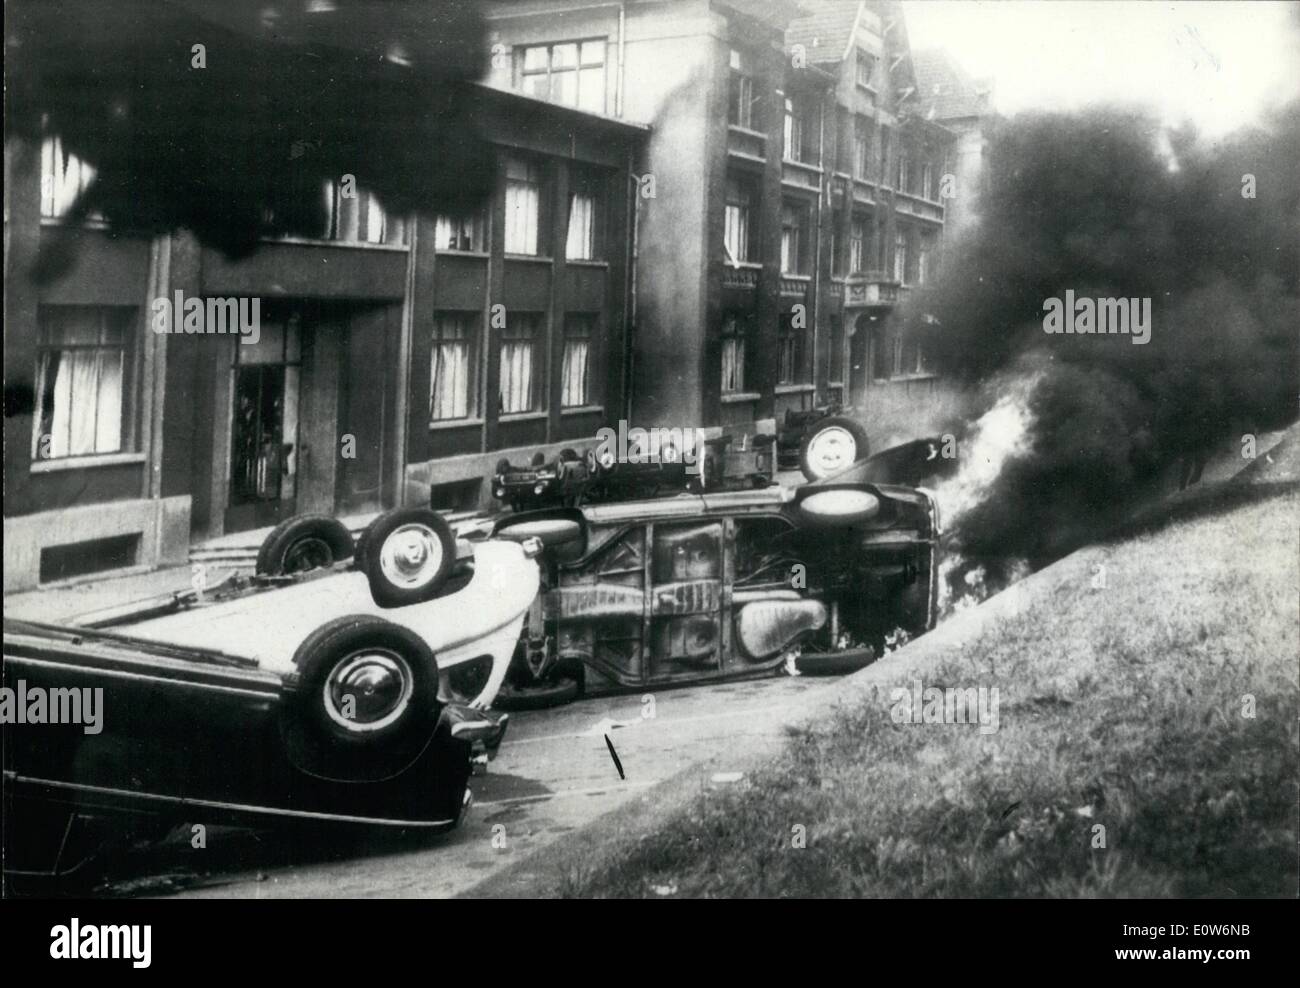 Aug. 08, 1961 - Riot Scenes in Merlebach After Mine Disaster: Riots broke out in Merlebach (ALSACE) mining district after demonstrations staged by the miners demanding the increase of safety measures after the recent mine disaster. Photo shows burnt out cars in front of the management building. Stock Photo